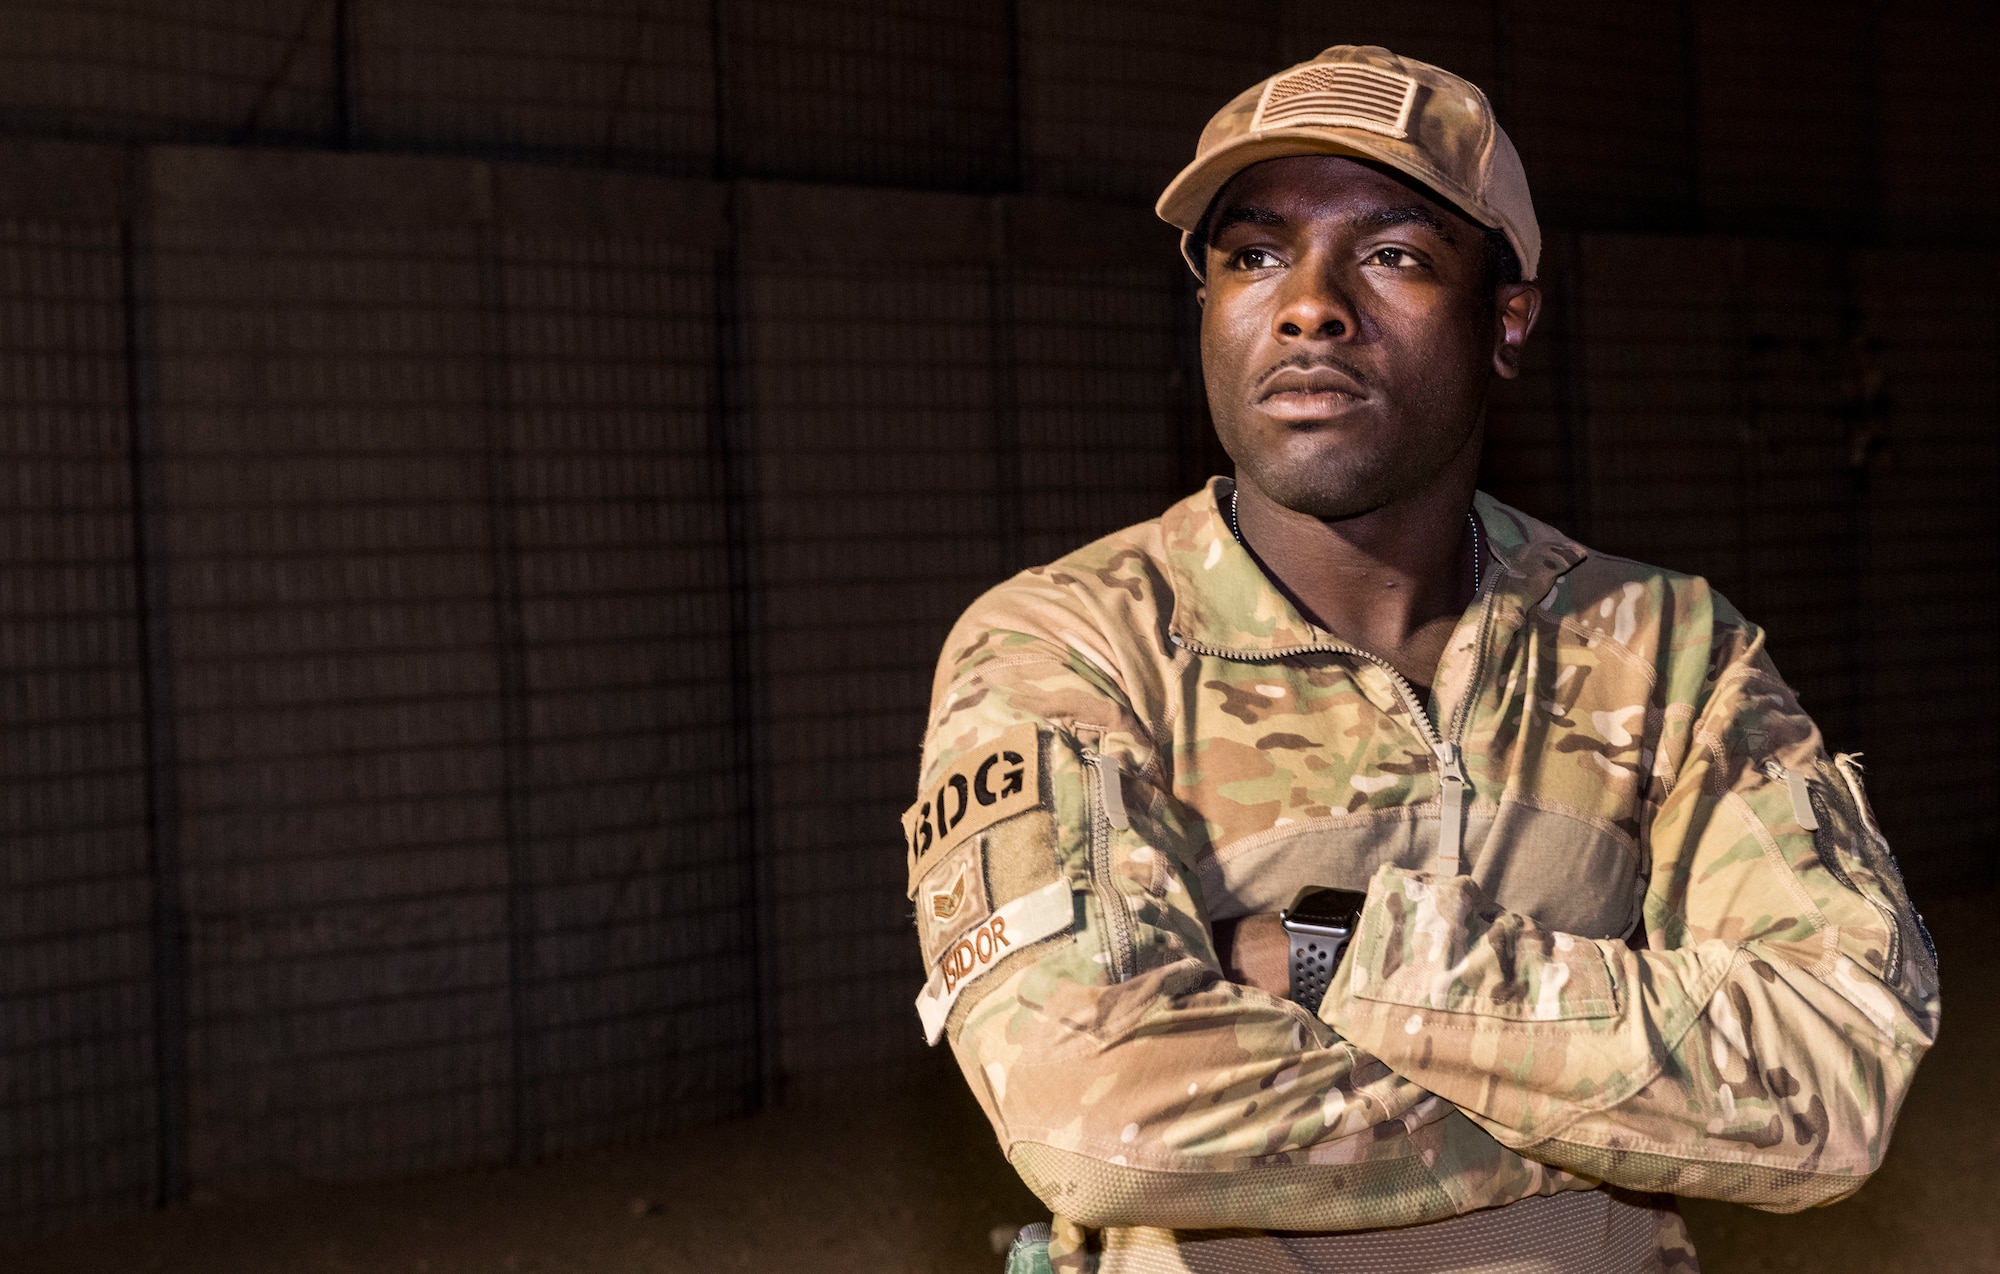 .S. Air Force Staff Sgt. Mackenzie Isidor, 822nd Expeditionary Base Defense Squadron fire team leader, stands on post at Nigerien Air Base 201, in Agadez, Niger, Feb. 26, 2018. Isidor routinely discusses the importance of diversity with his Airmen. (U.S. Air Force photo by Tech. Sgt. Nick Wilson)